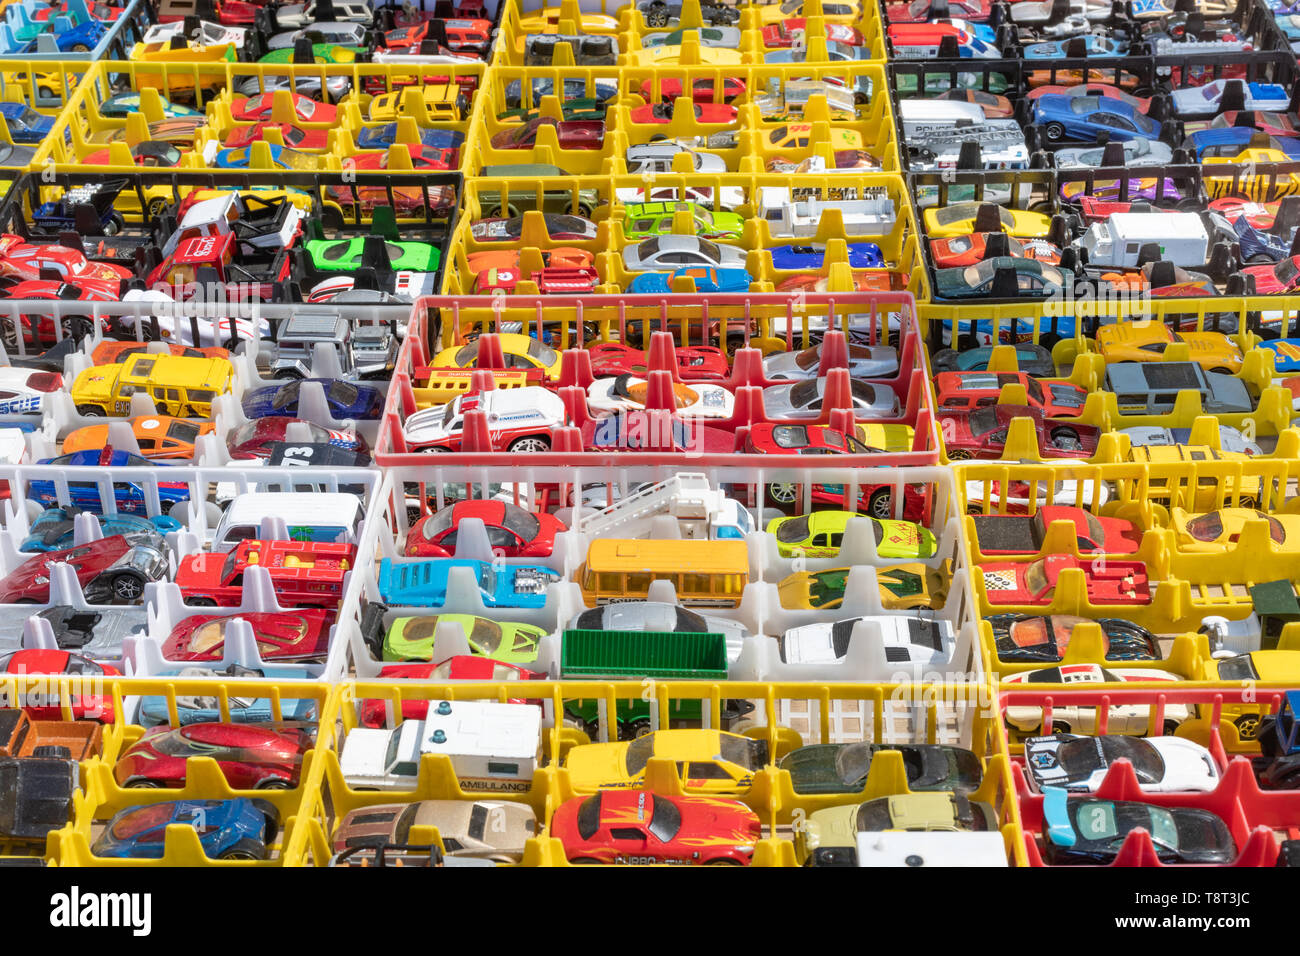 Toy cars in plastic trays on sale on a stall at a car show, UK Stock Photo